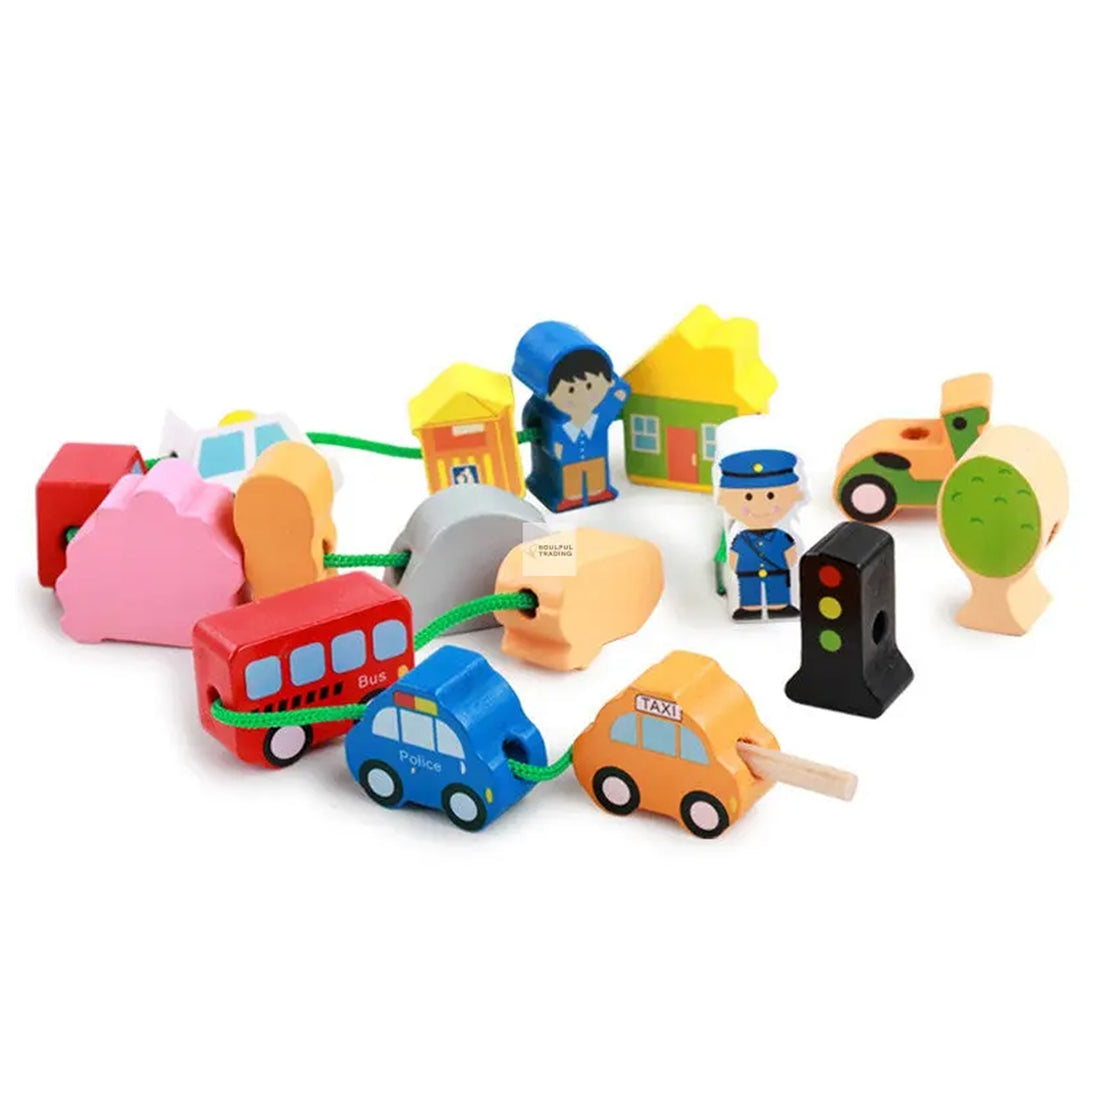 A collection of colorful wooden Soulful Trading Montessori Large Particle Beaded Toys for Kids including vehicles, figures, and trees on a white background.